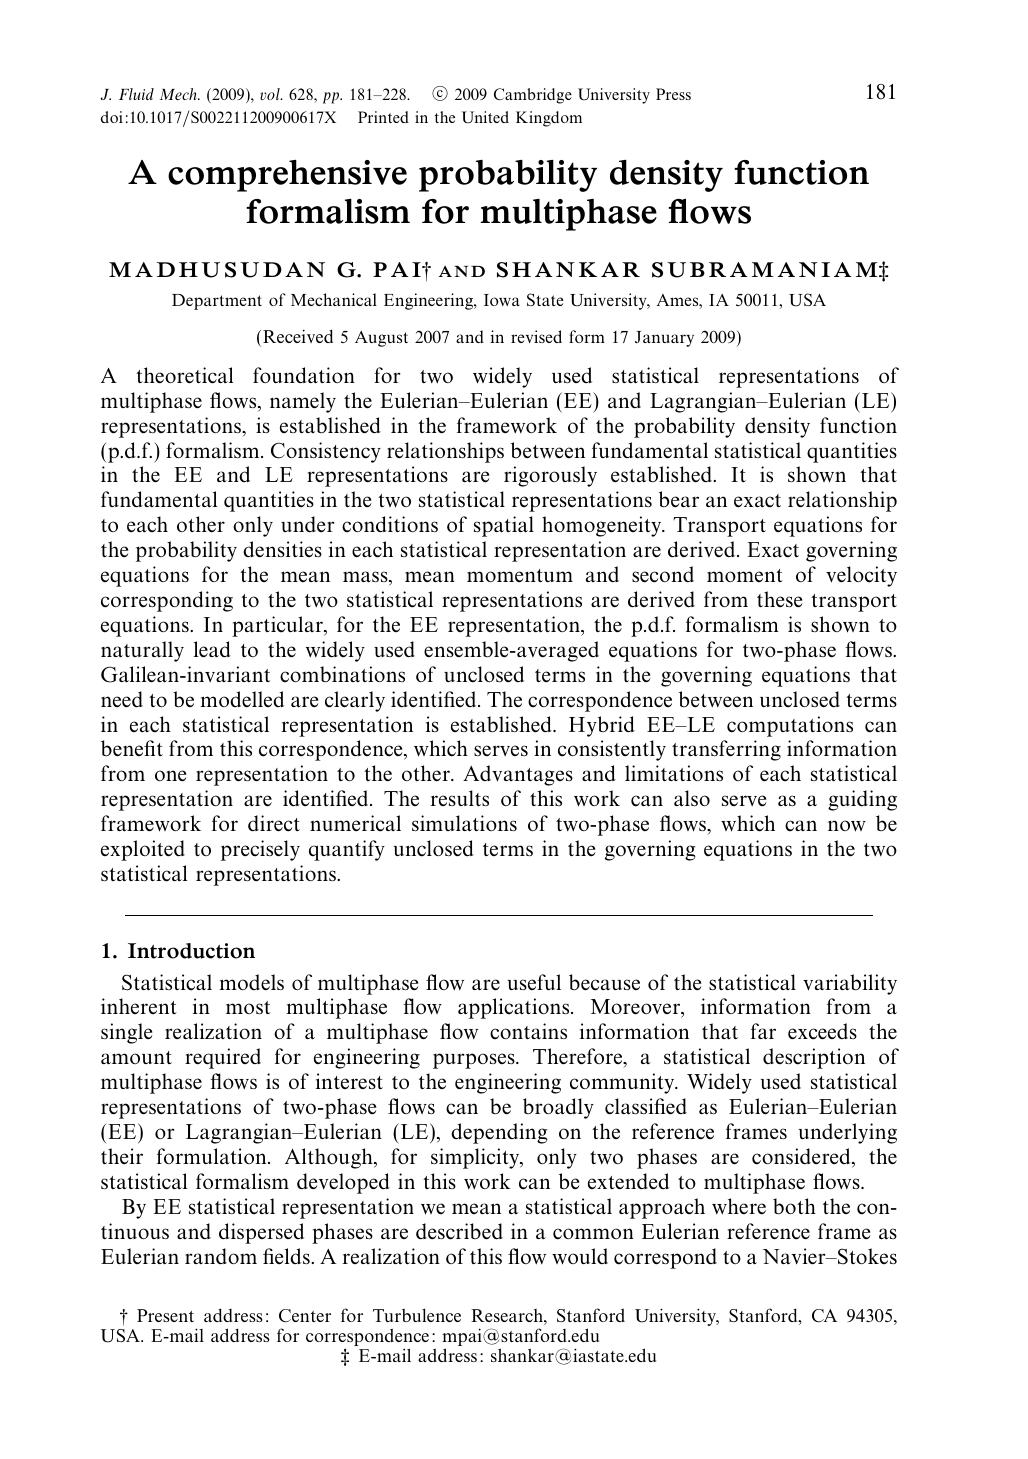 A comprehensive probability density function formalism for multiphase flows by MADHUSUDAN G. PAI SHANKAR SUBRAMANIAM